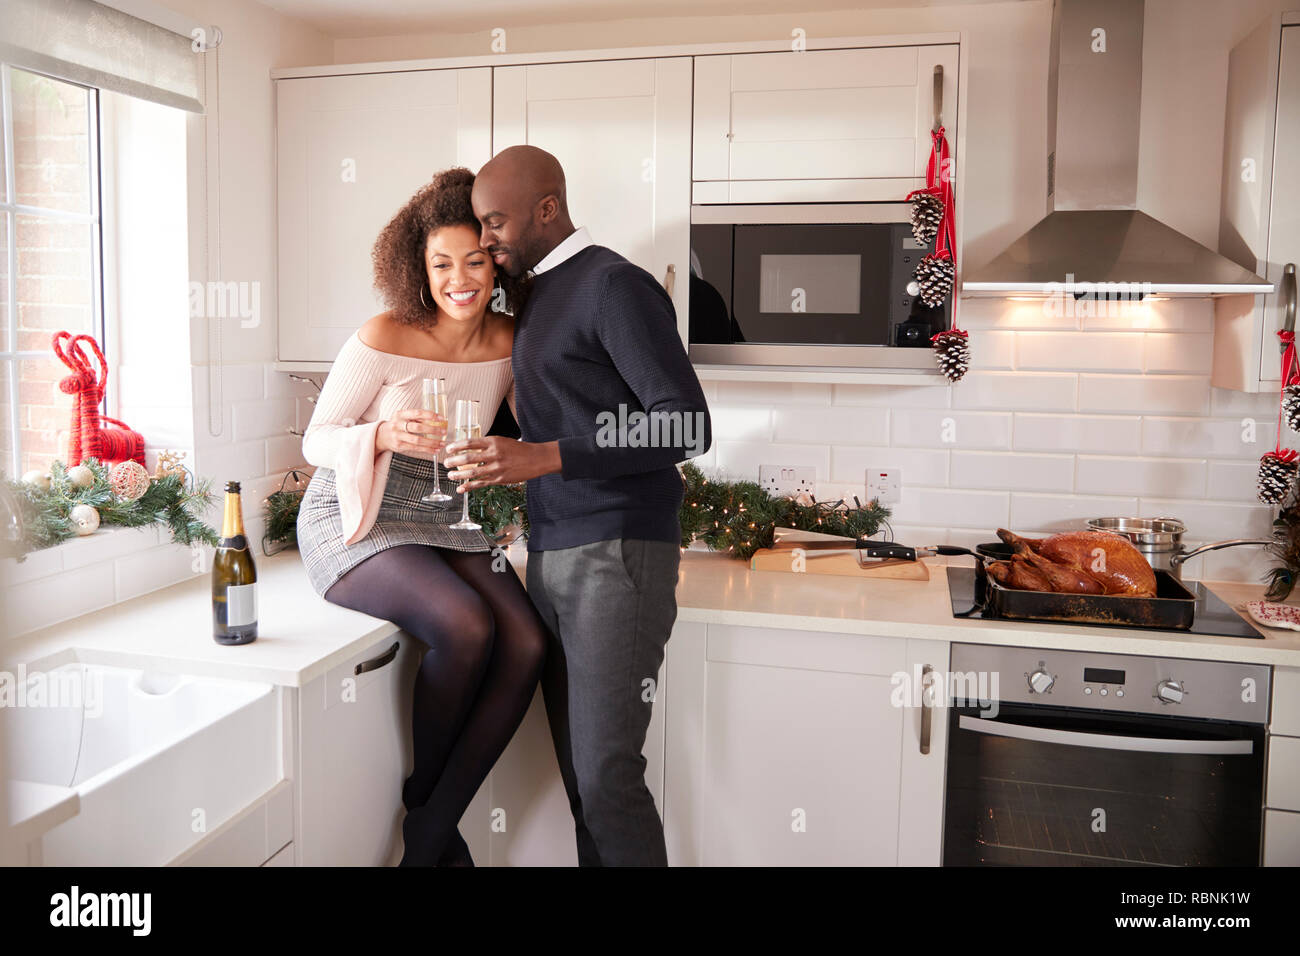 Young mixed race couple drinking champagne embrace in their kitchen while preparing Christmas dinner Stock Photo